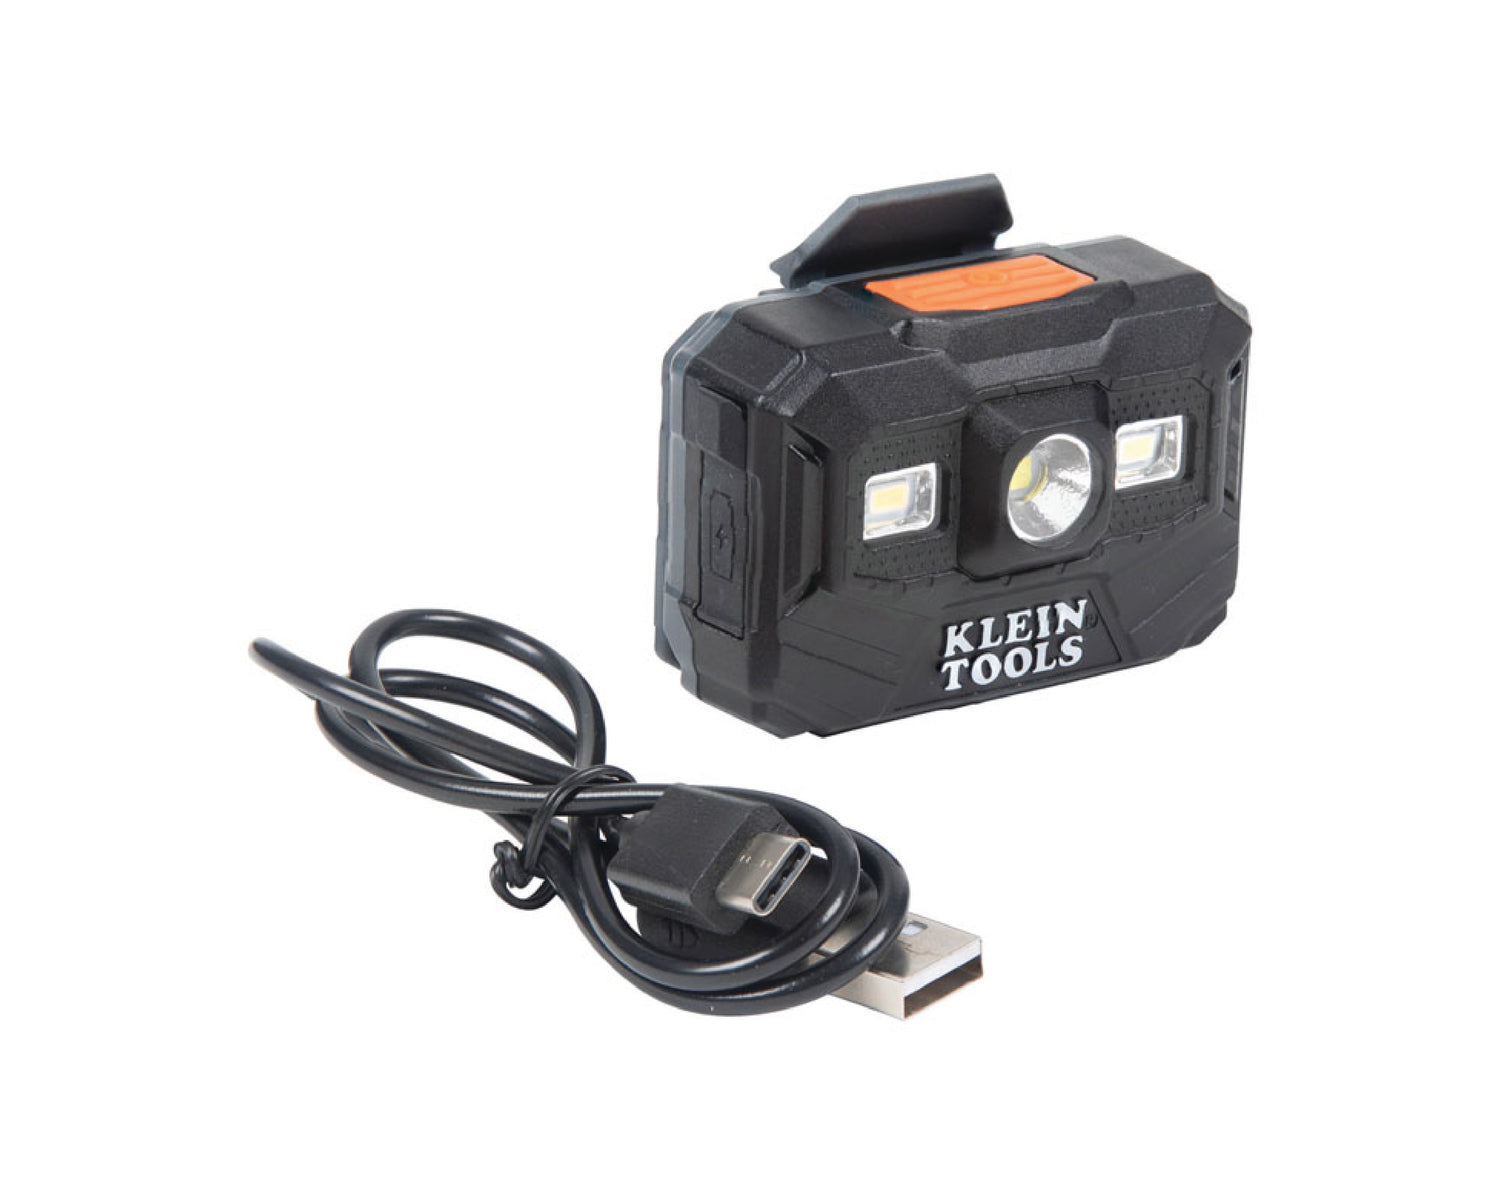 RECHARGEABLE HEADLAMP AND WORK LIGHT, 300 LUMENS ALL-DAY RUNTIME, 10230493 - Cable Connection & Supply Company Inc.